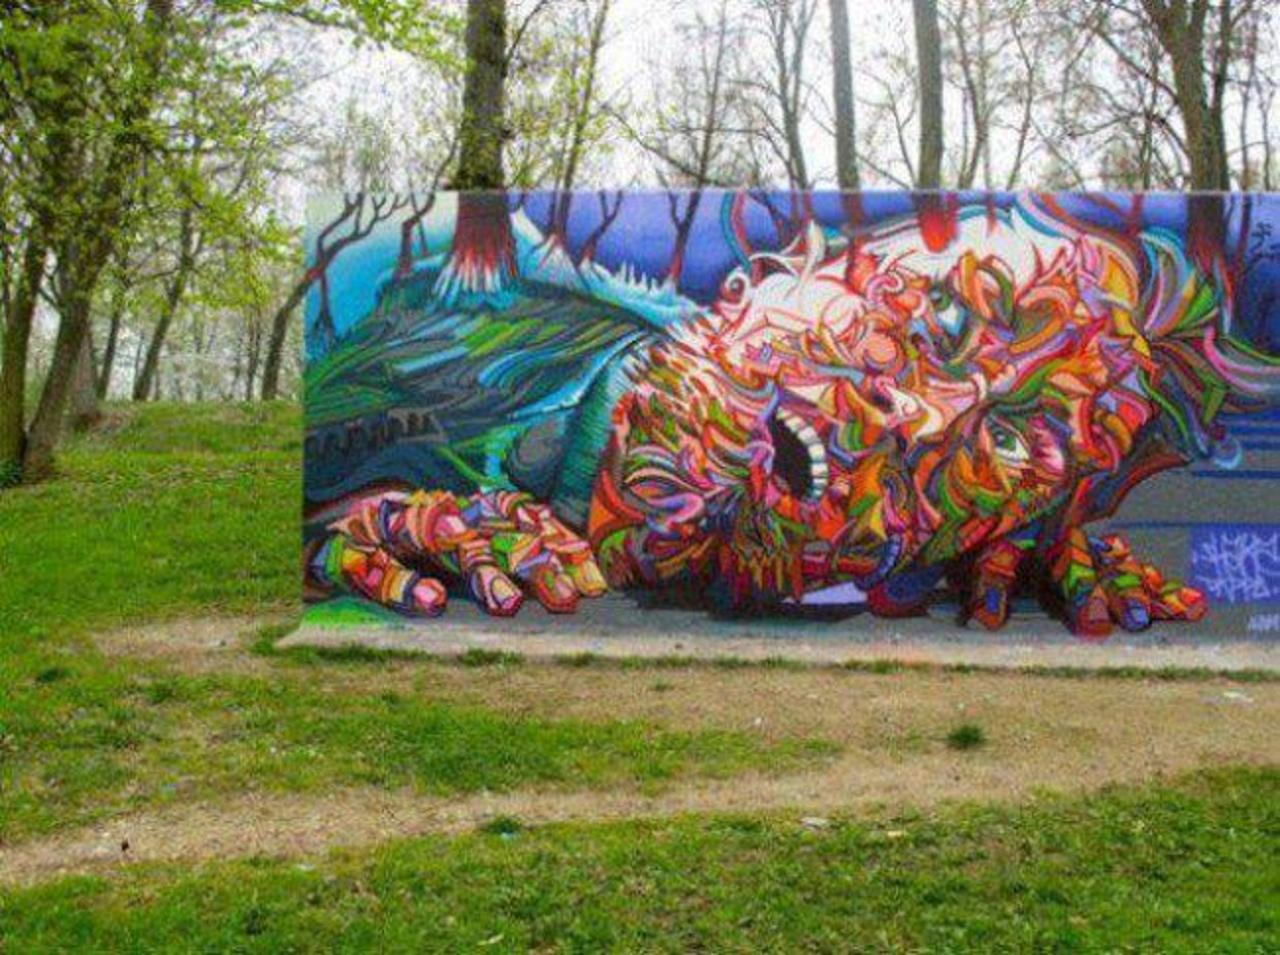 Crazy details in this one. See more: http://bit.ly/1AAtPZE #graffiti #mural https://t.co/k1f6gxKAiT